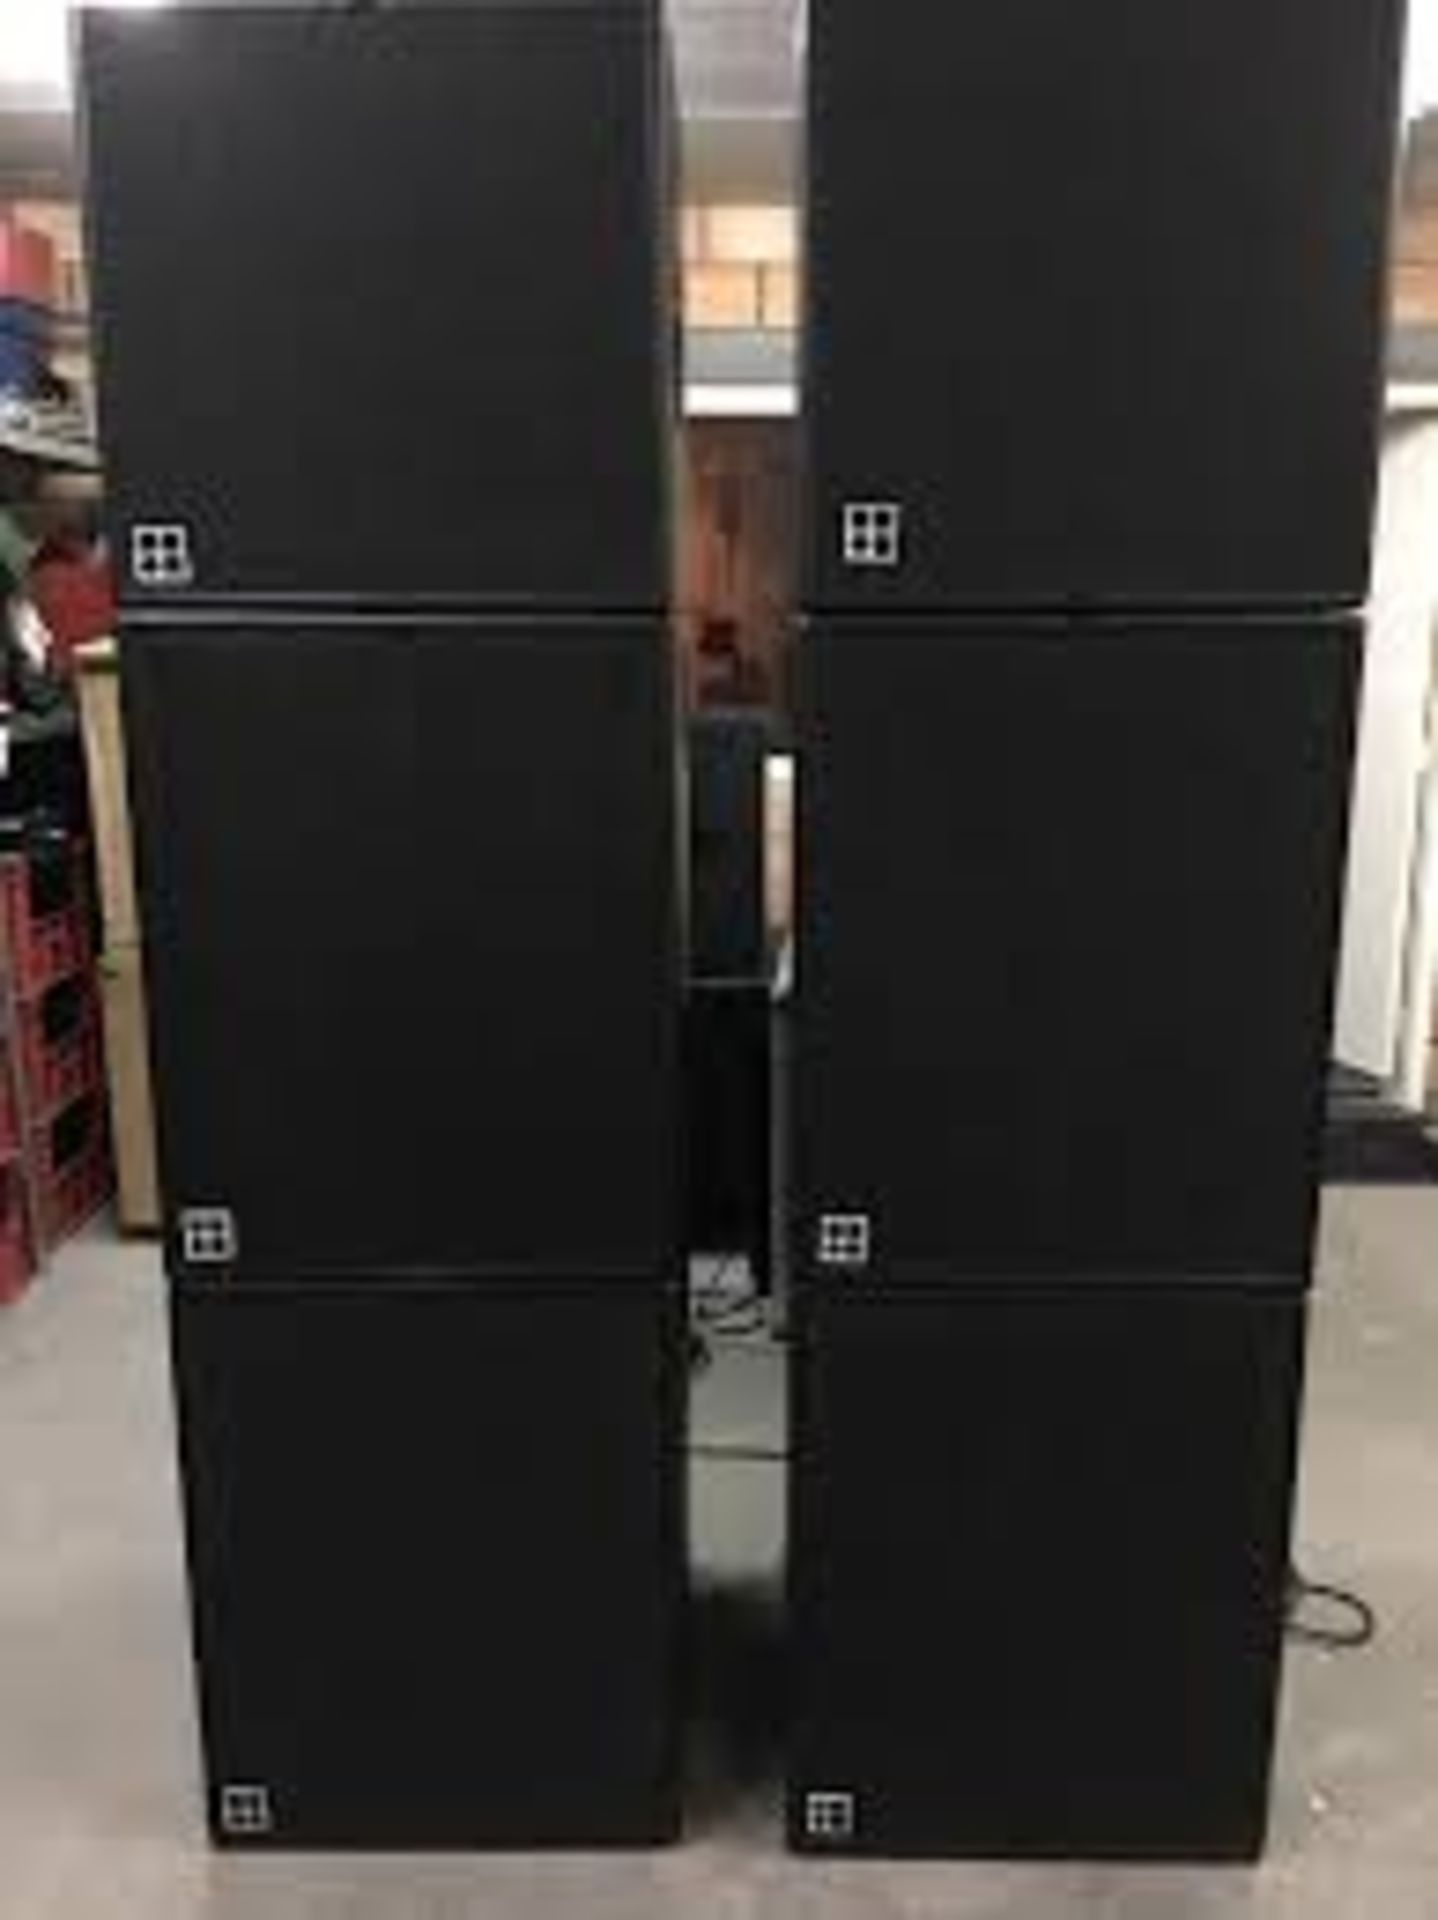 D and B Audiotechnik C7 Series Sound System with D12 Amplifiers, Racks and Cabling - Image 2 of 7